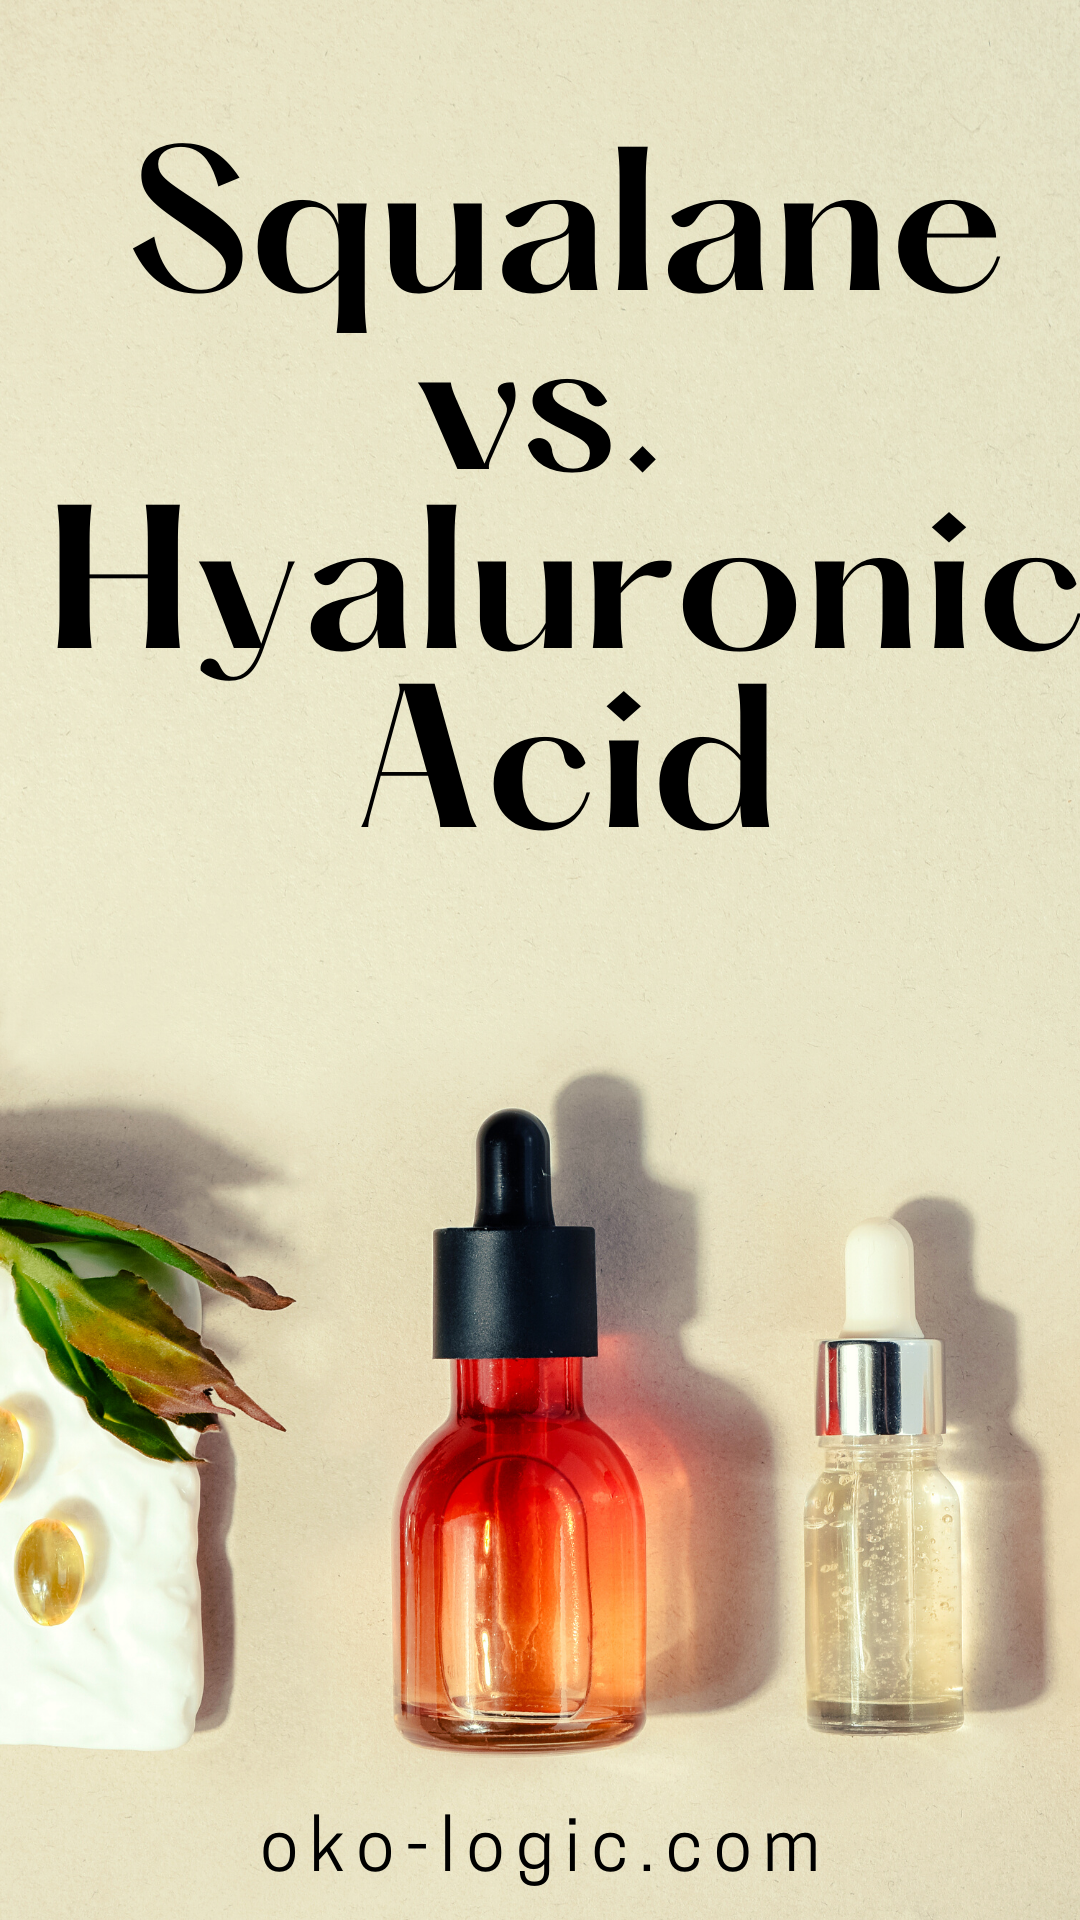 Squalane vs Hyaluronic Acid: Is One Better Than The Other?